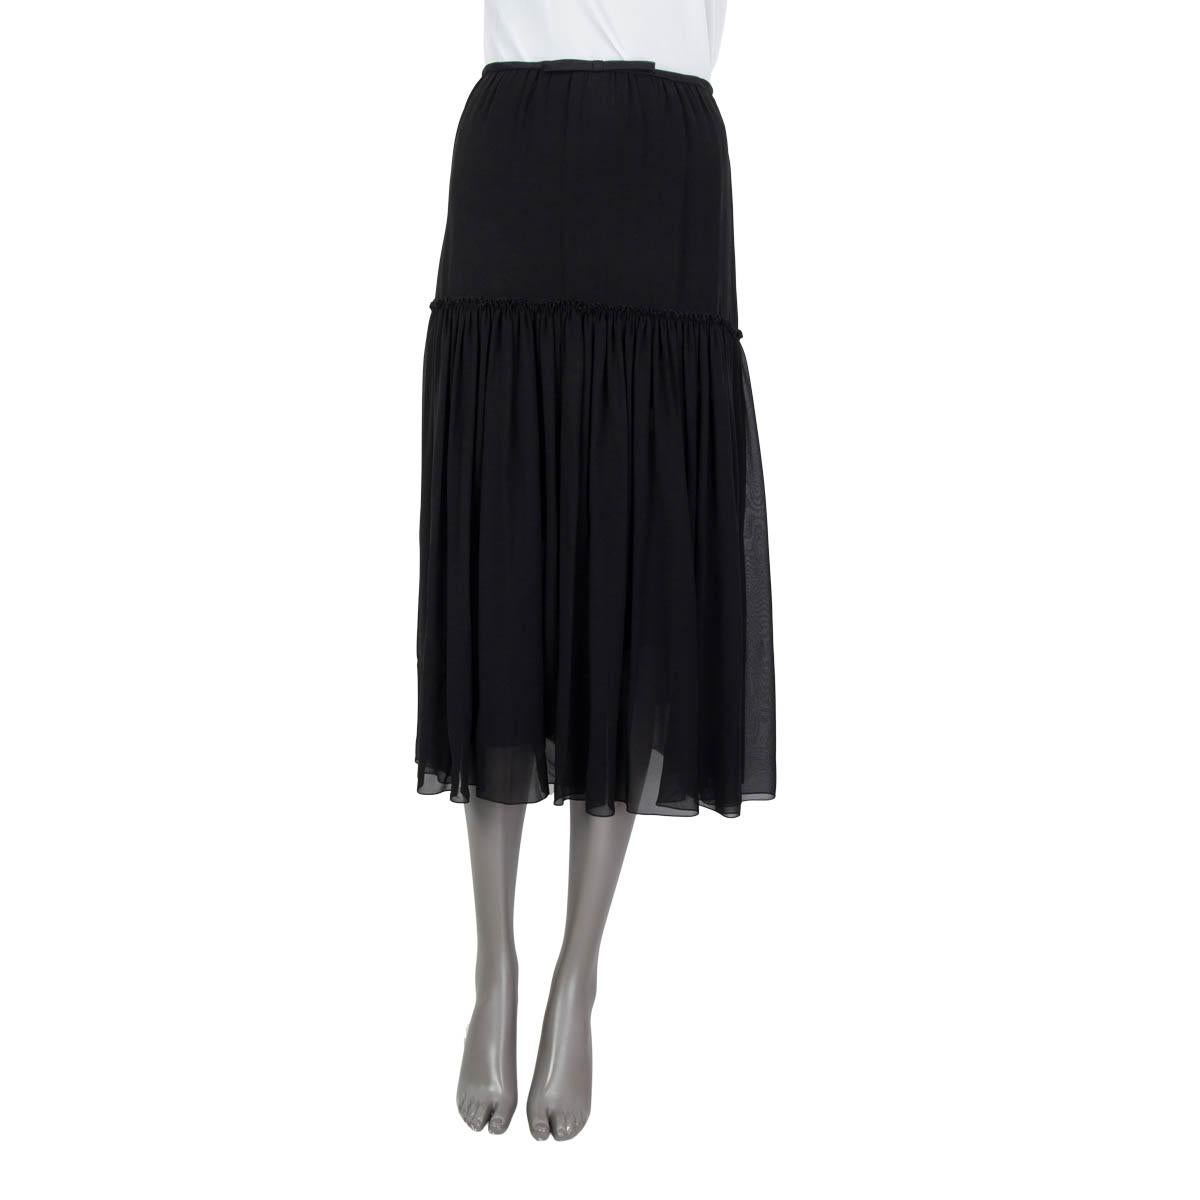 100% authentic Giambattista Valli midi skirt in black silk (100%). Embellished with ruffles, a black satin waistband and a satin mesh on the front. Opens with a concealed zipper and a hook on the back. Lined in black silk (100%). Has been worn once